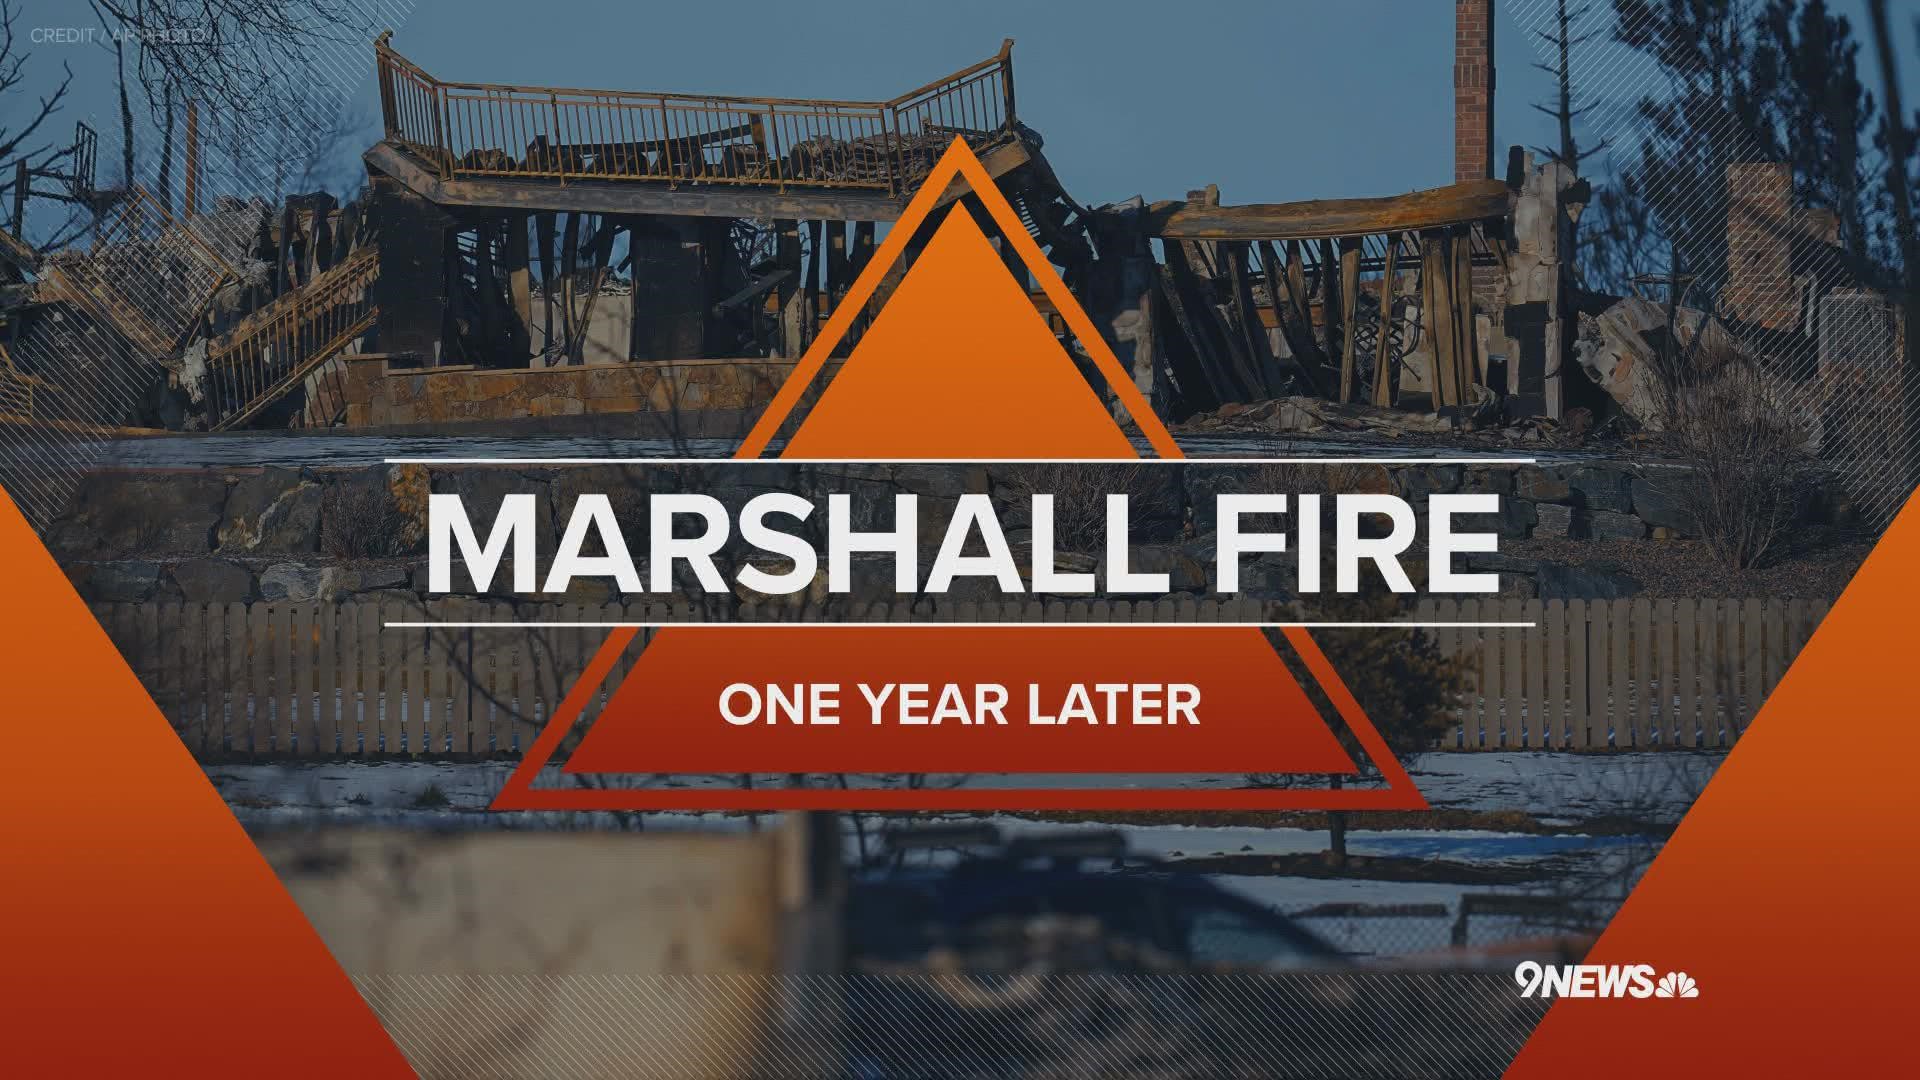 One year after Colorado’s most destructive wildfire burned through Boulder County, 9NEWS explores how the Marshall Fire exploded and how families are rebuilding.